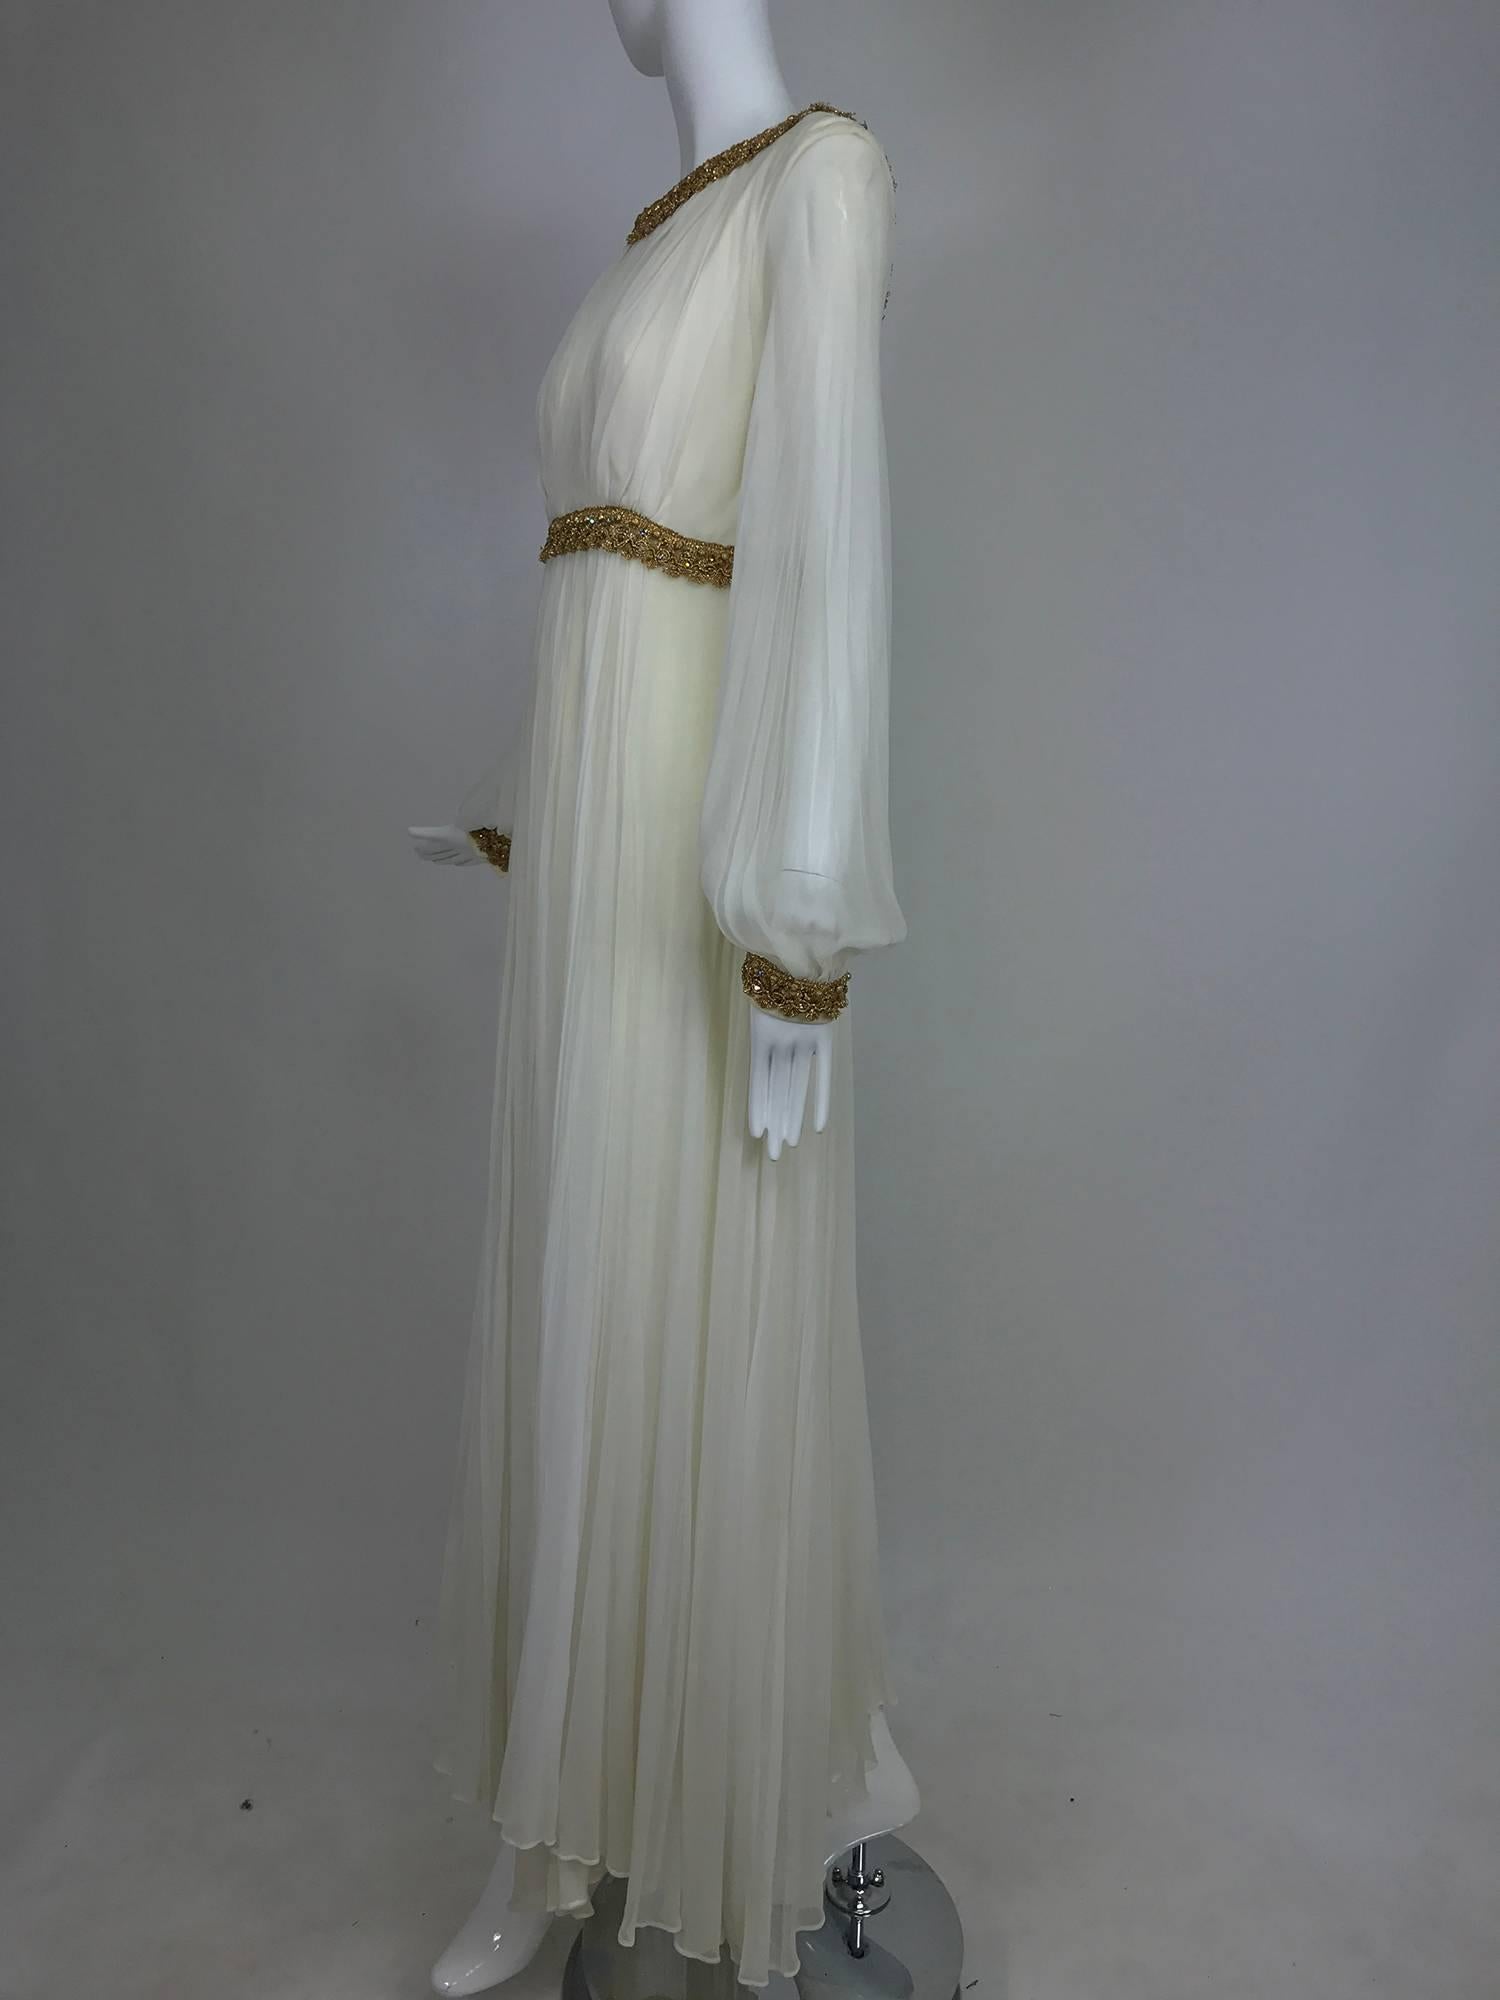 Vintage cream double layer silk chiffon maxi dress with gold rhinestone set braid trim from the 1970s...The chiffon drapes and flows, this is a very graceful dress and could definitely be worn as a wedding dress...Deep scoop neckline is trimmed in